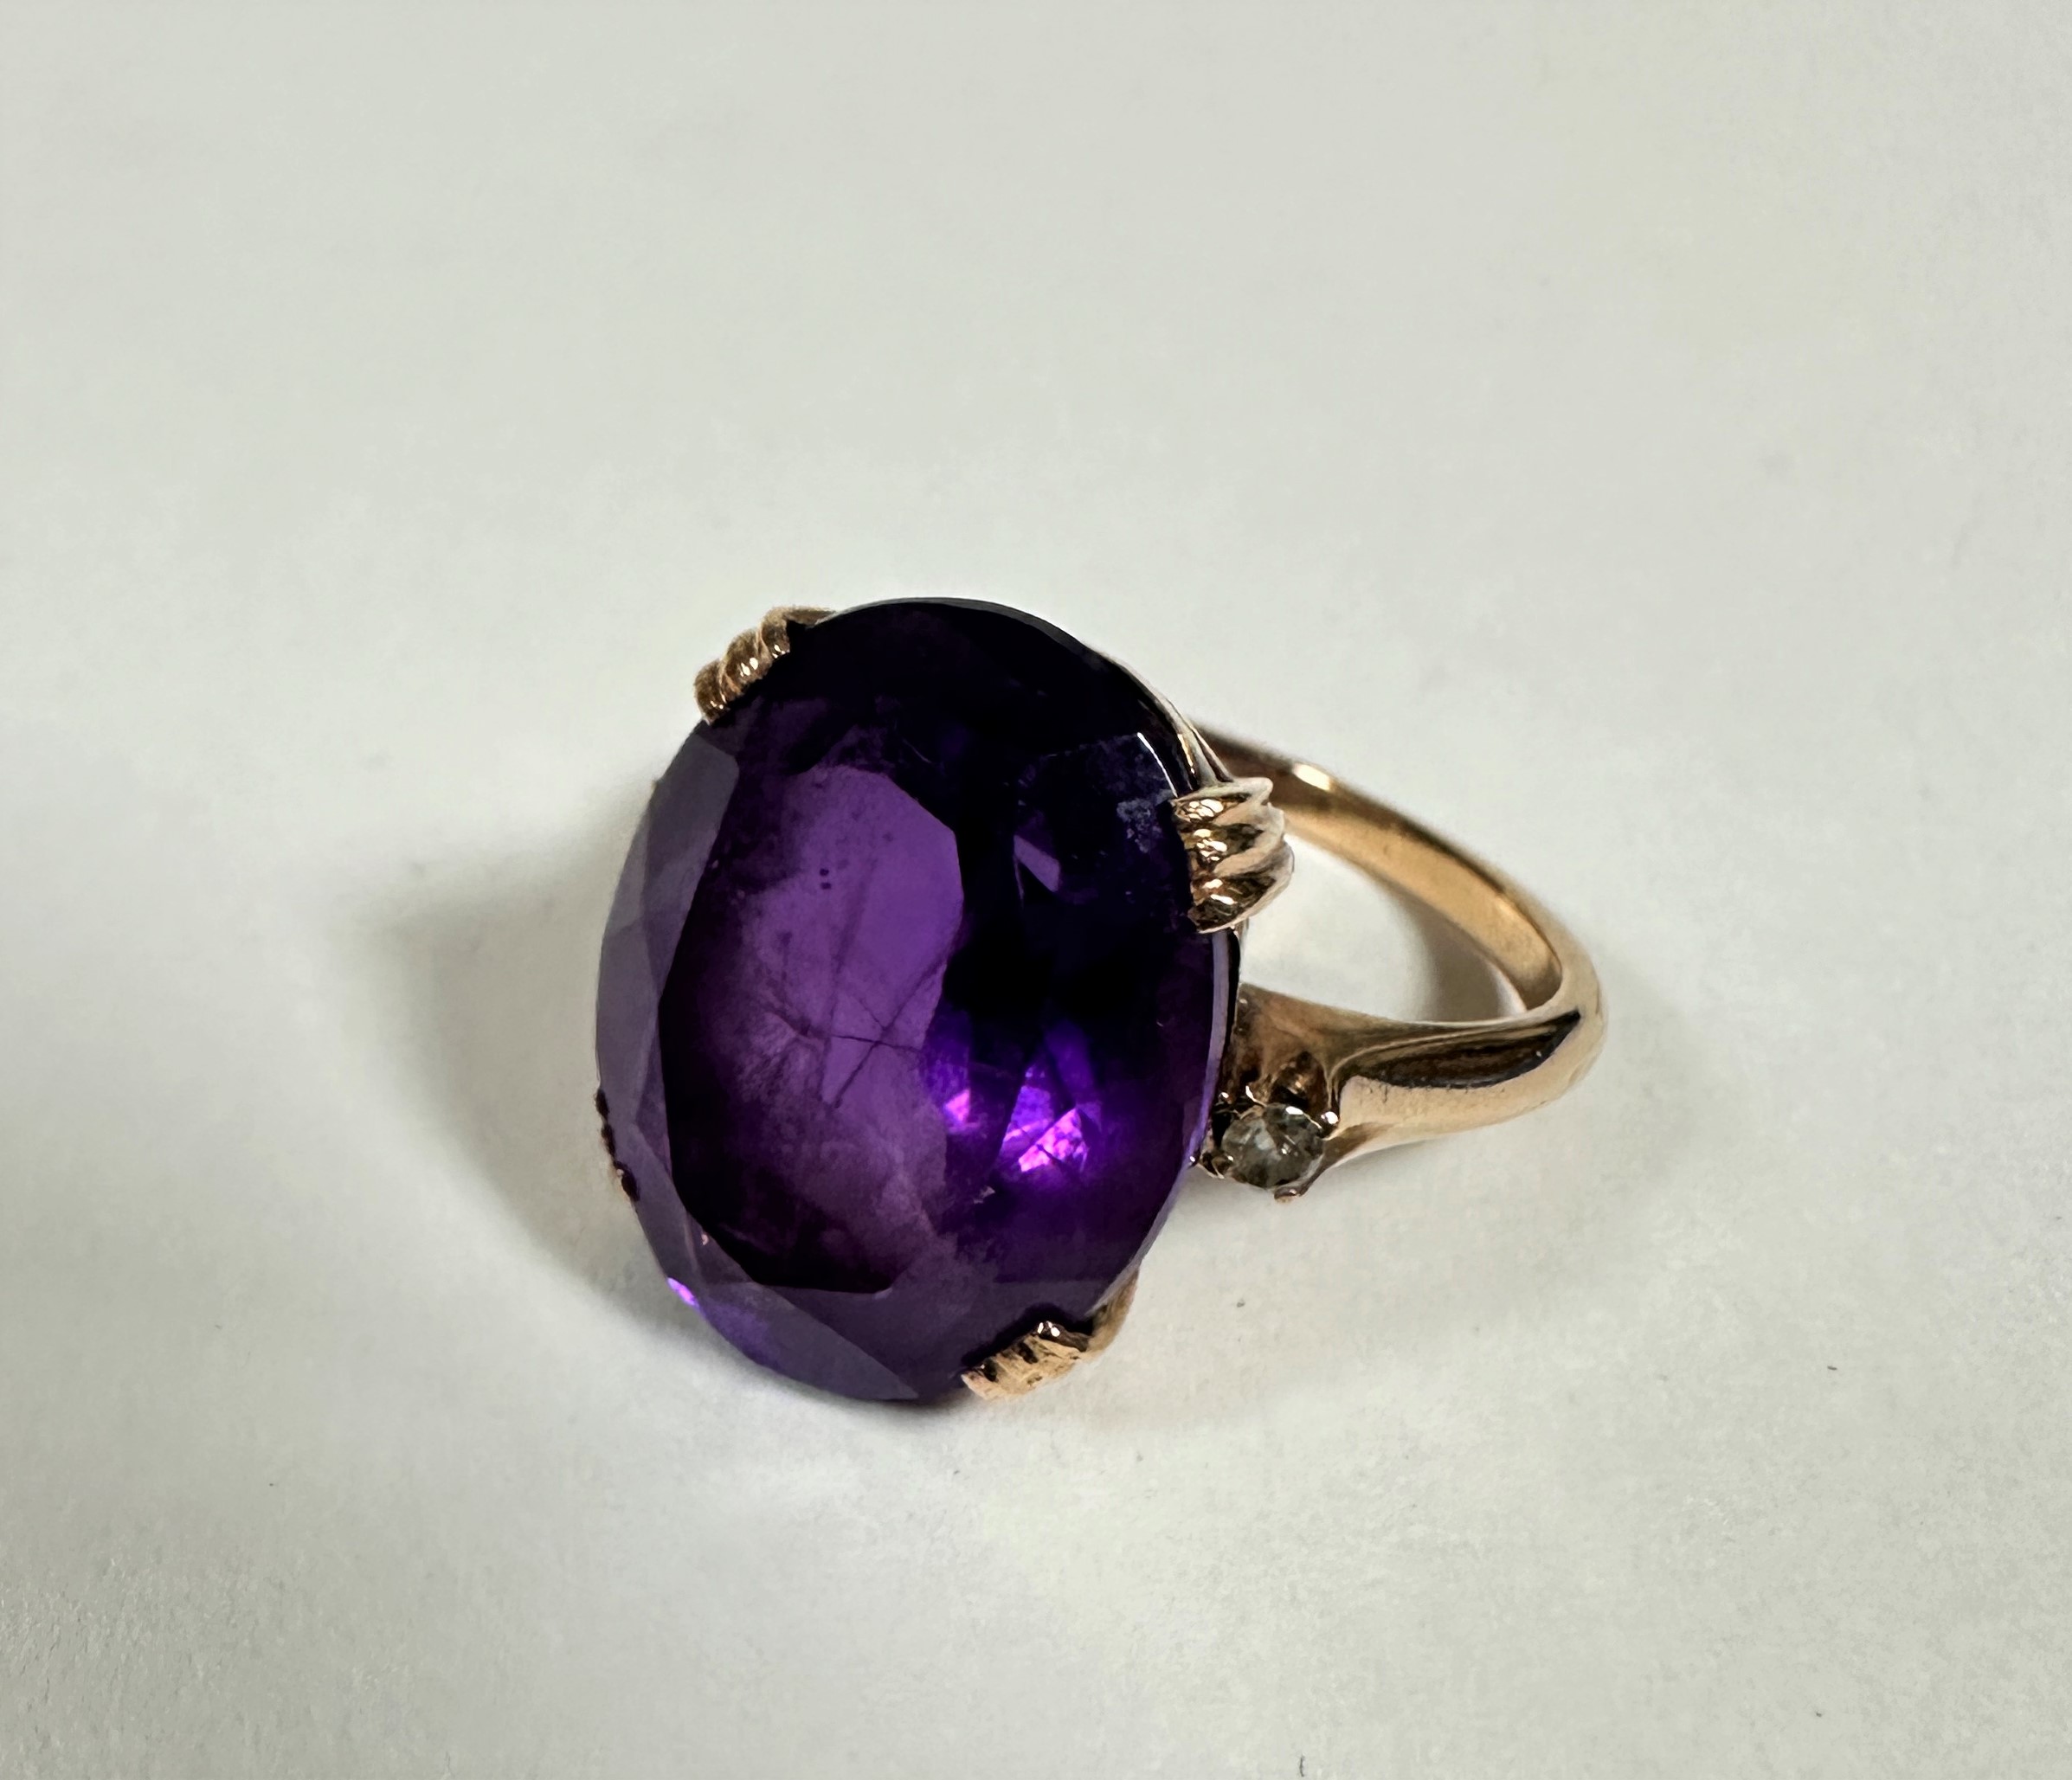 An 18ct gold dress ring set oval faceted amethyst with diamond point set shoulders, mounted in